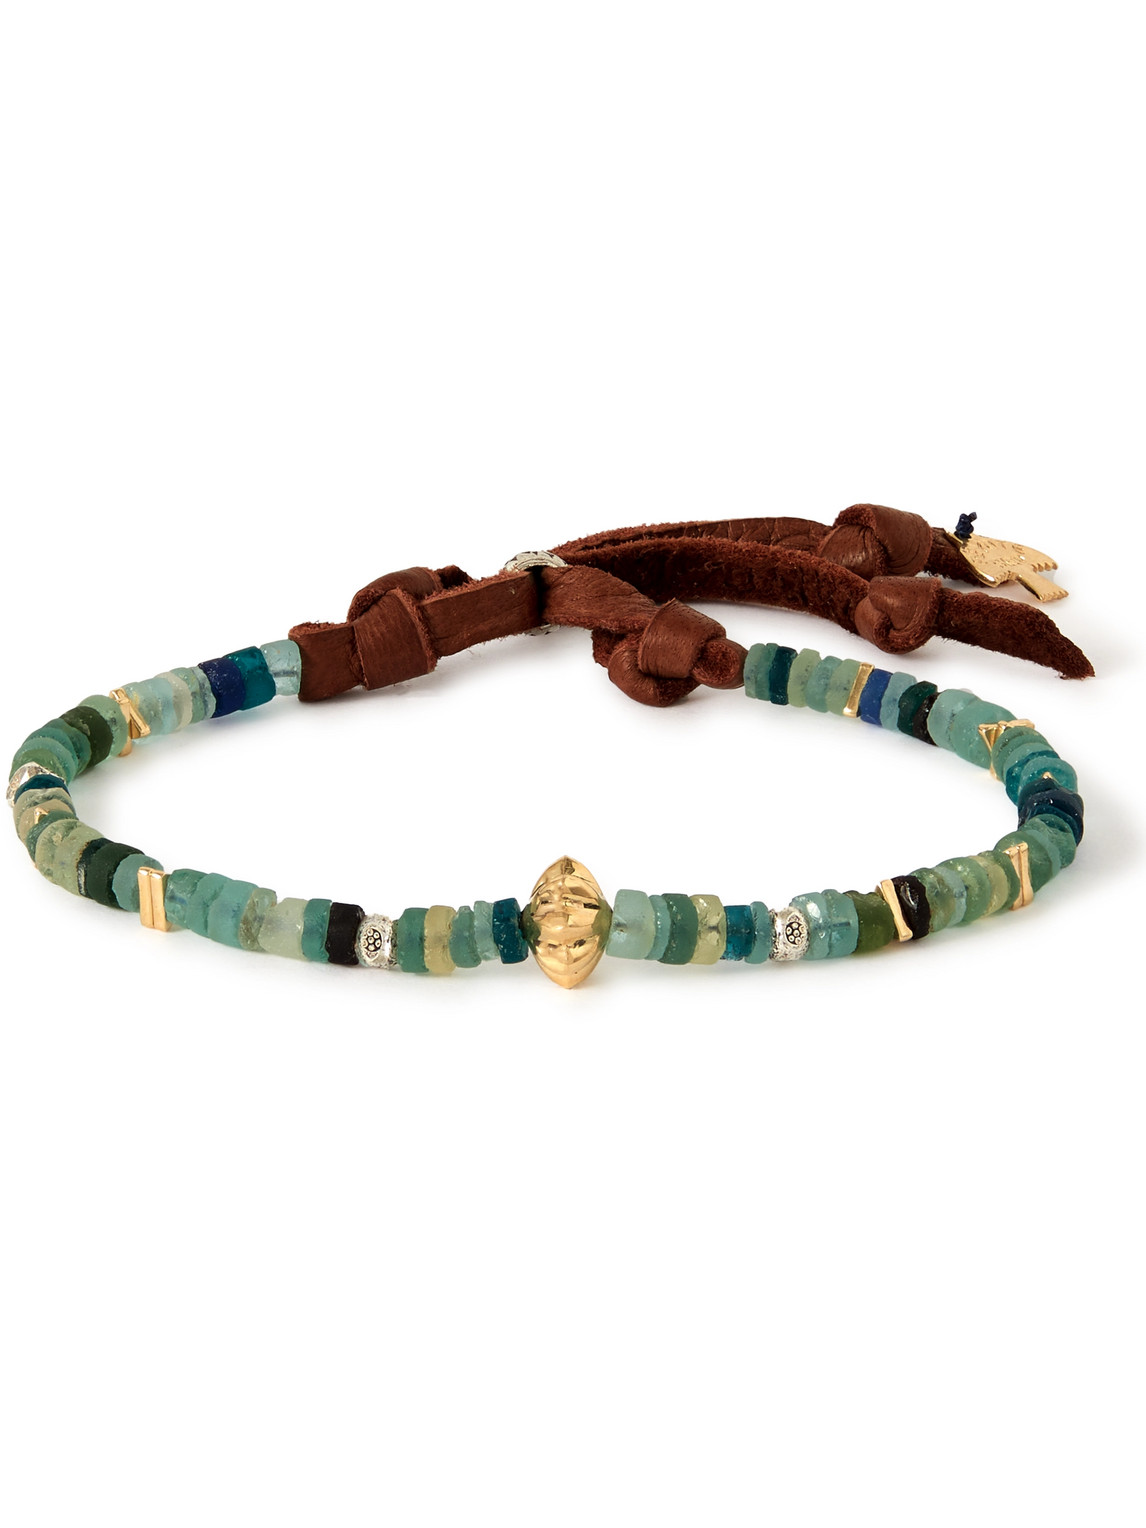 Peyote Bird Apogee Silver, Gold-filled And Leather Beaded Bracelet In Multi